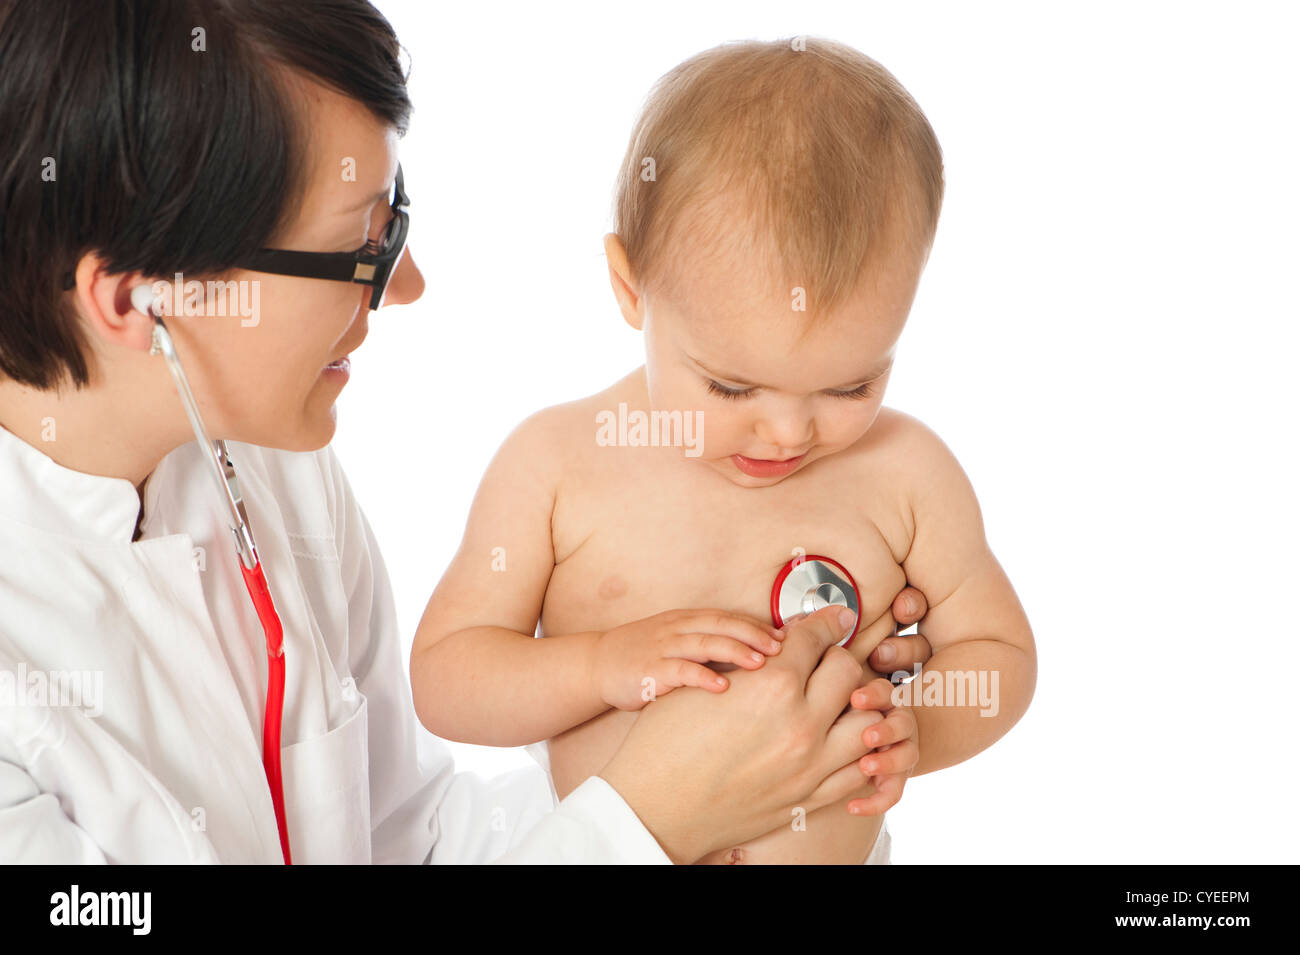 Female doctor with toddler Stock Photo